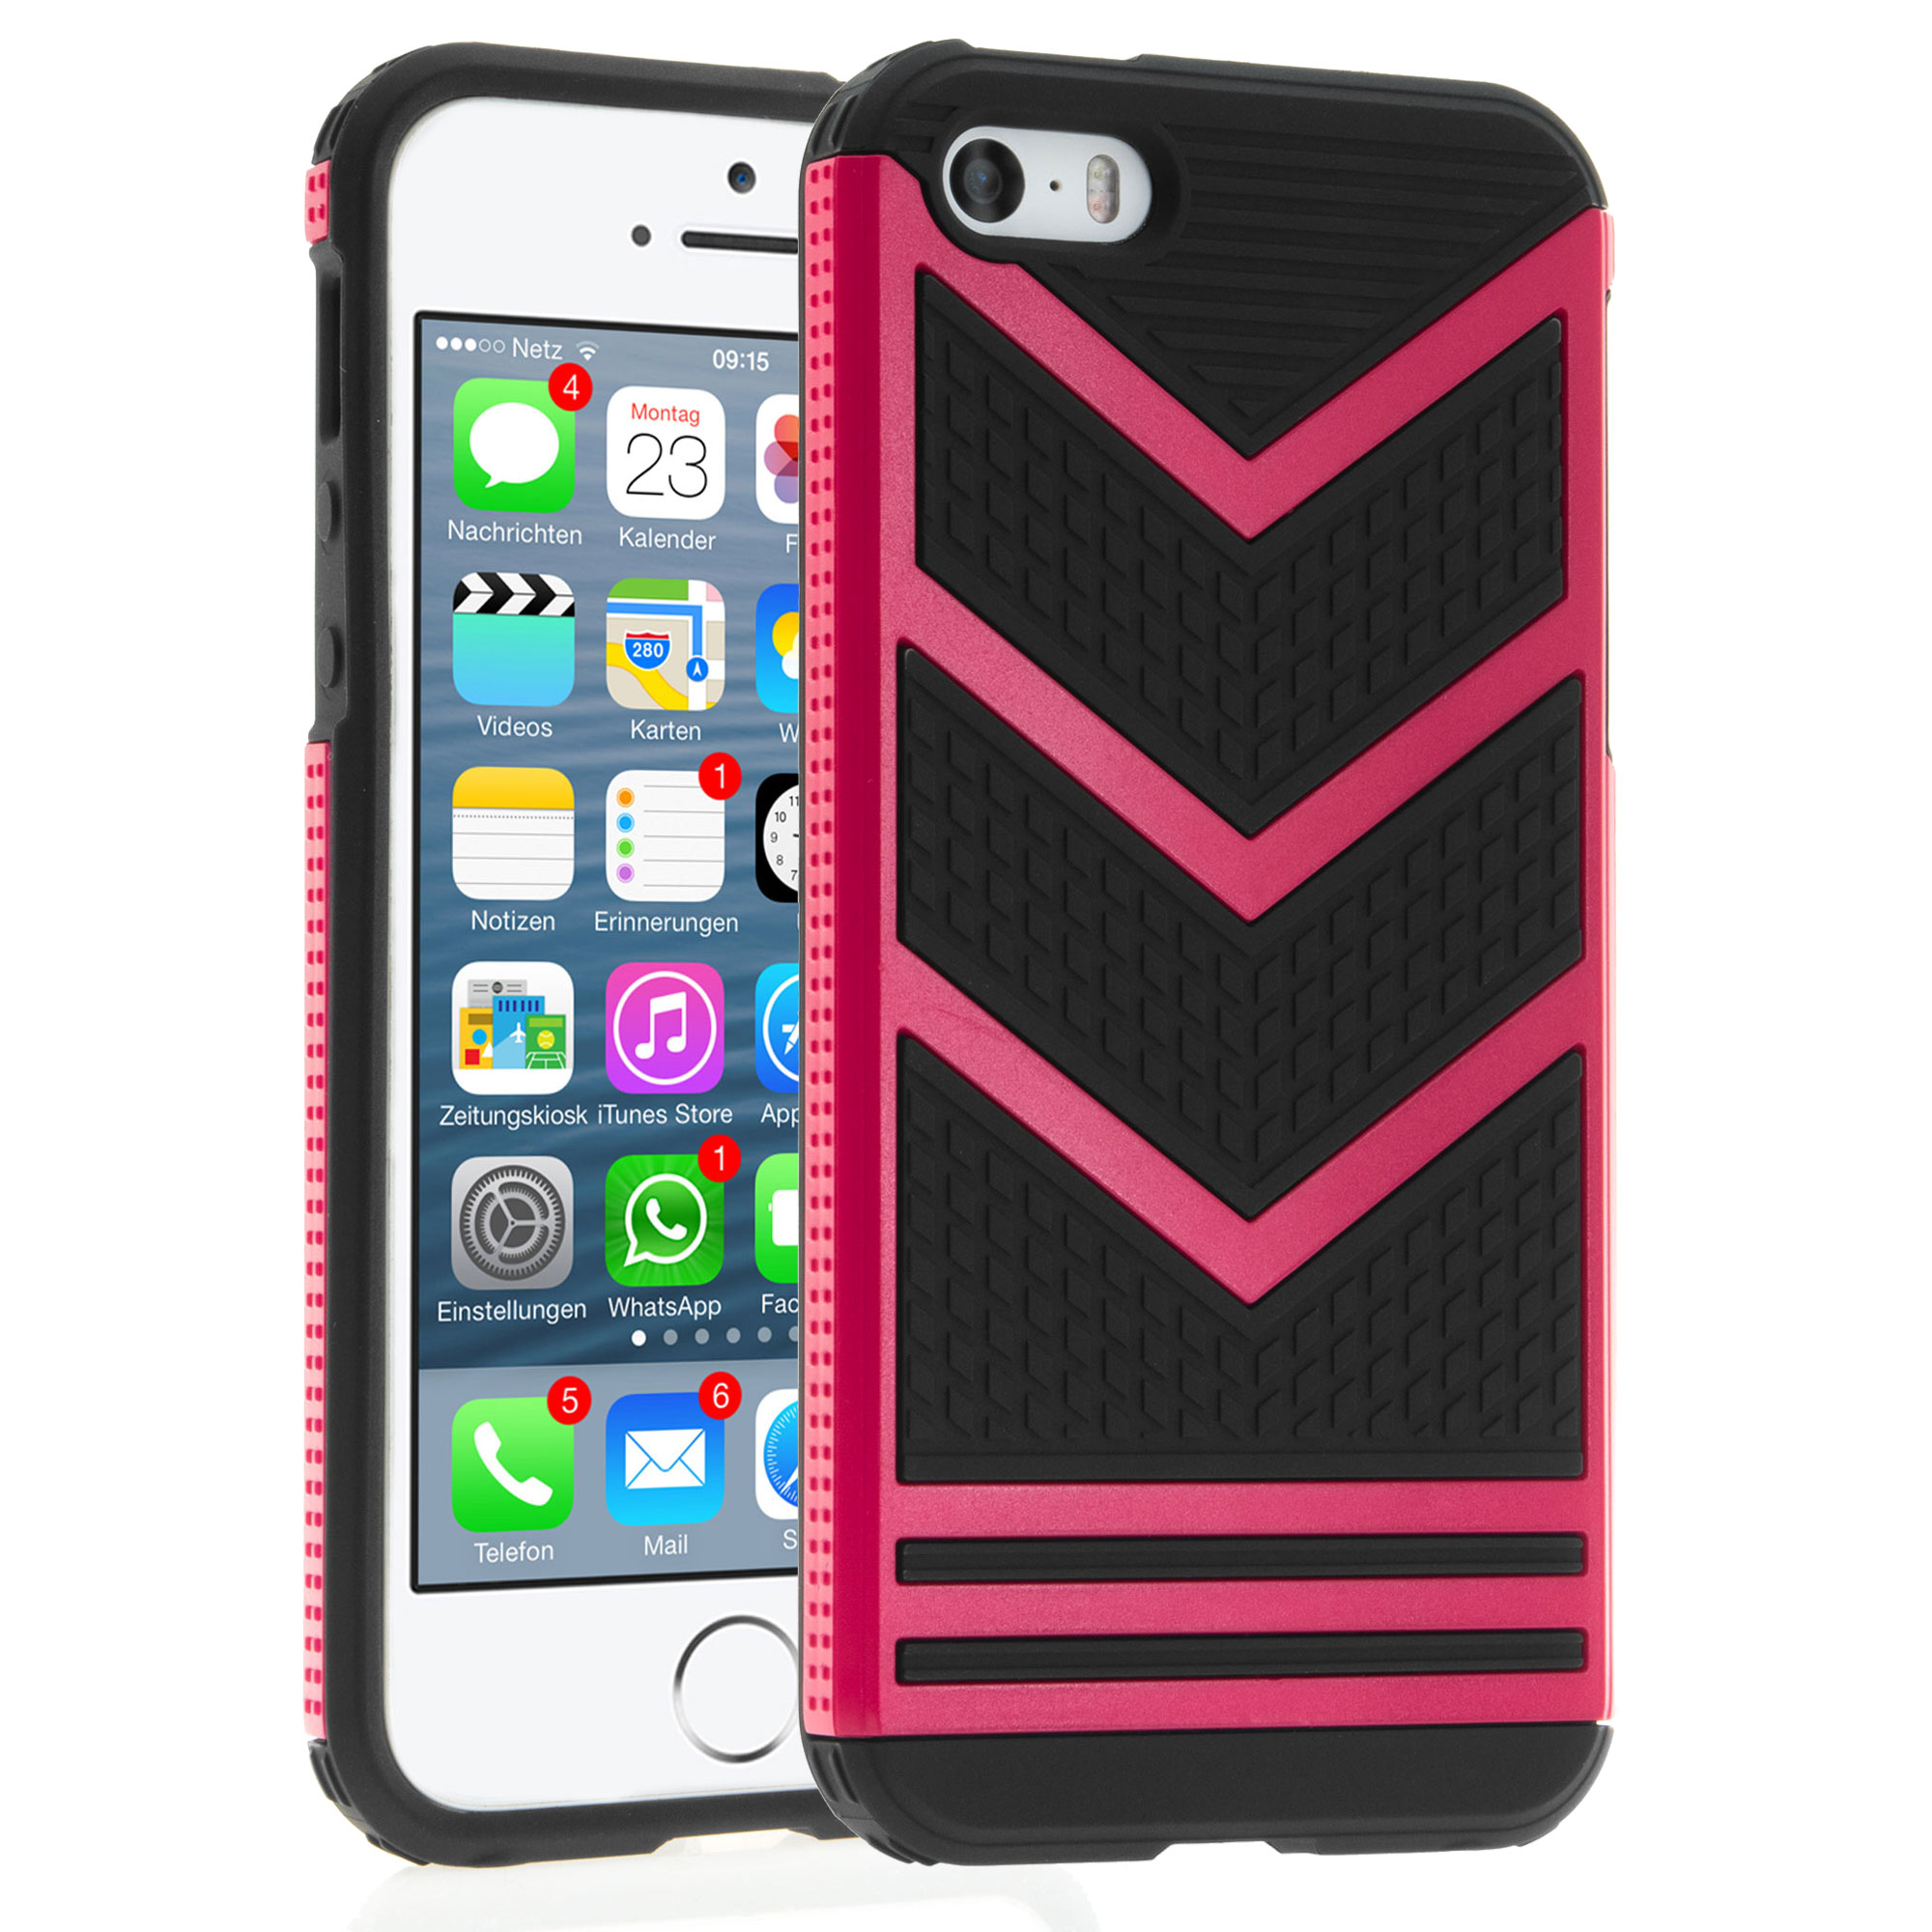 iPhone 5 / 5s Hülle Bumper Case Outdoor Backcover - rotviolett